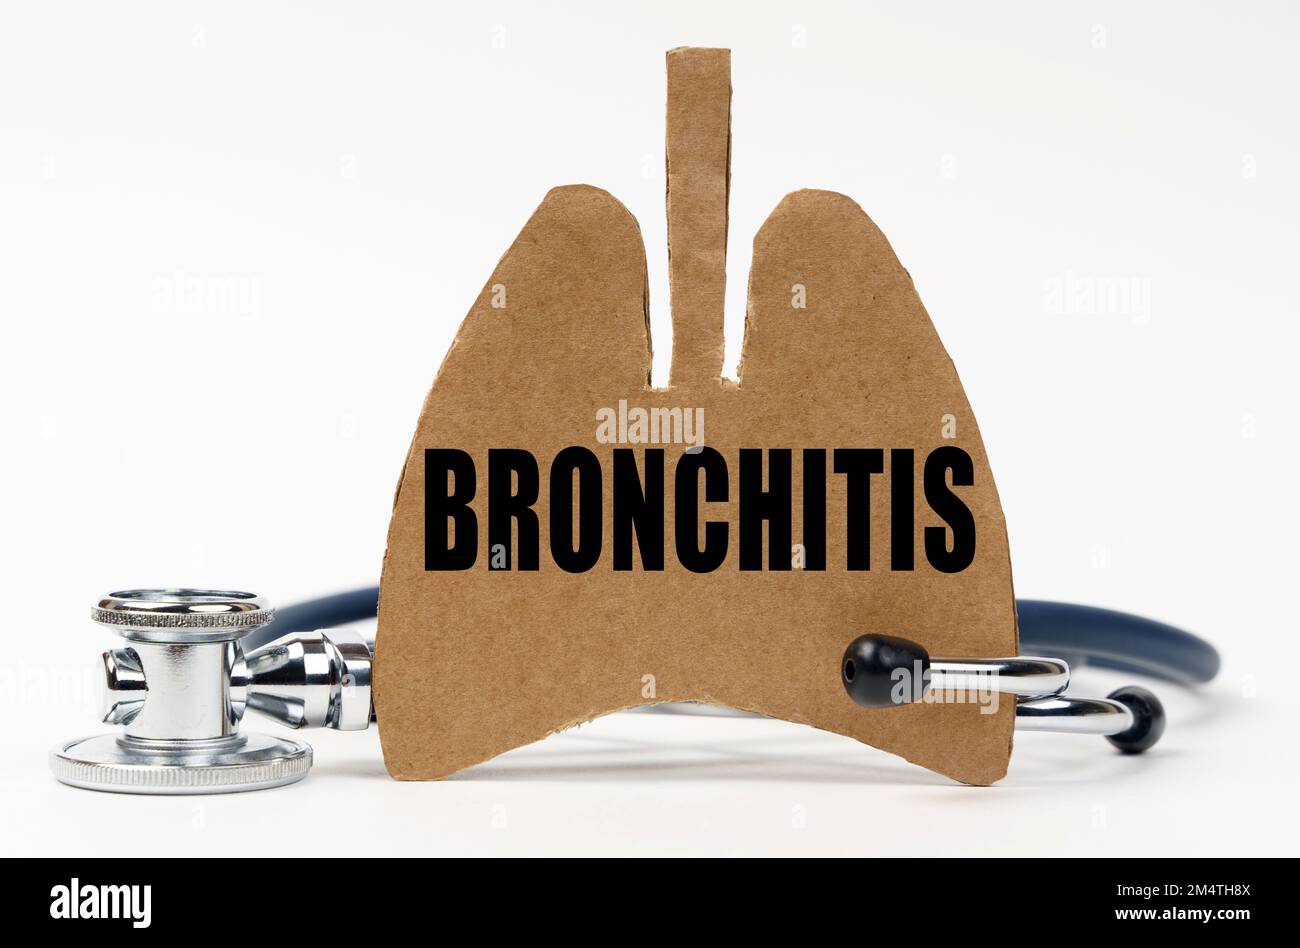 Medical concept. On a white surface are a stethoscope and a cardboard figure of a lung with the inscription - Bronchitis Stock Photo